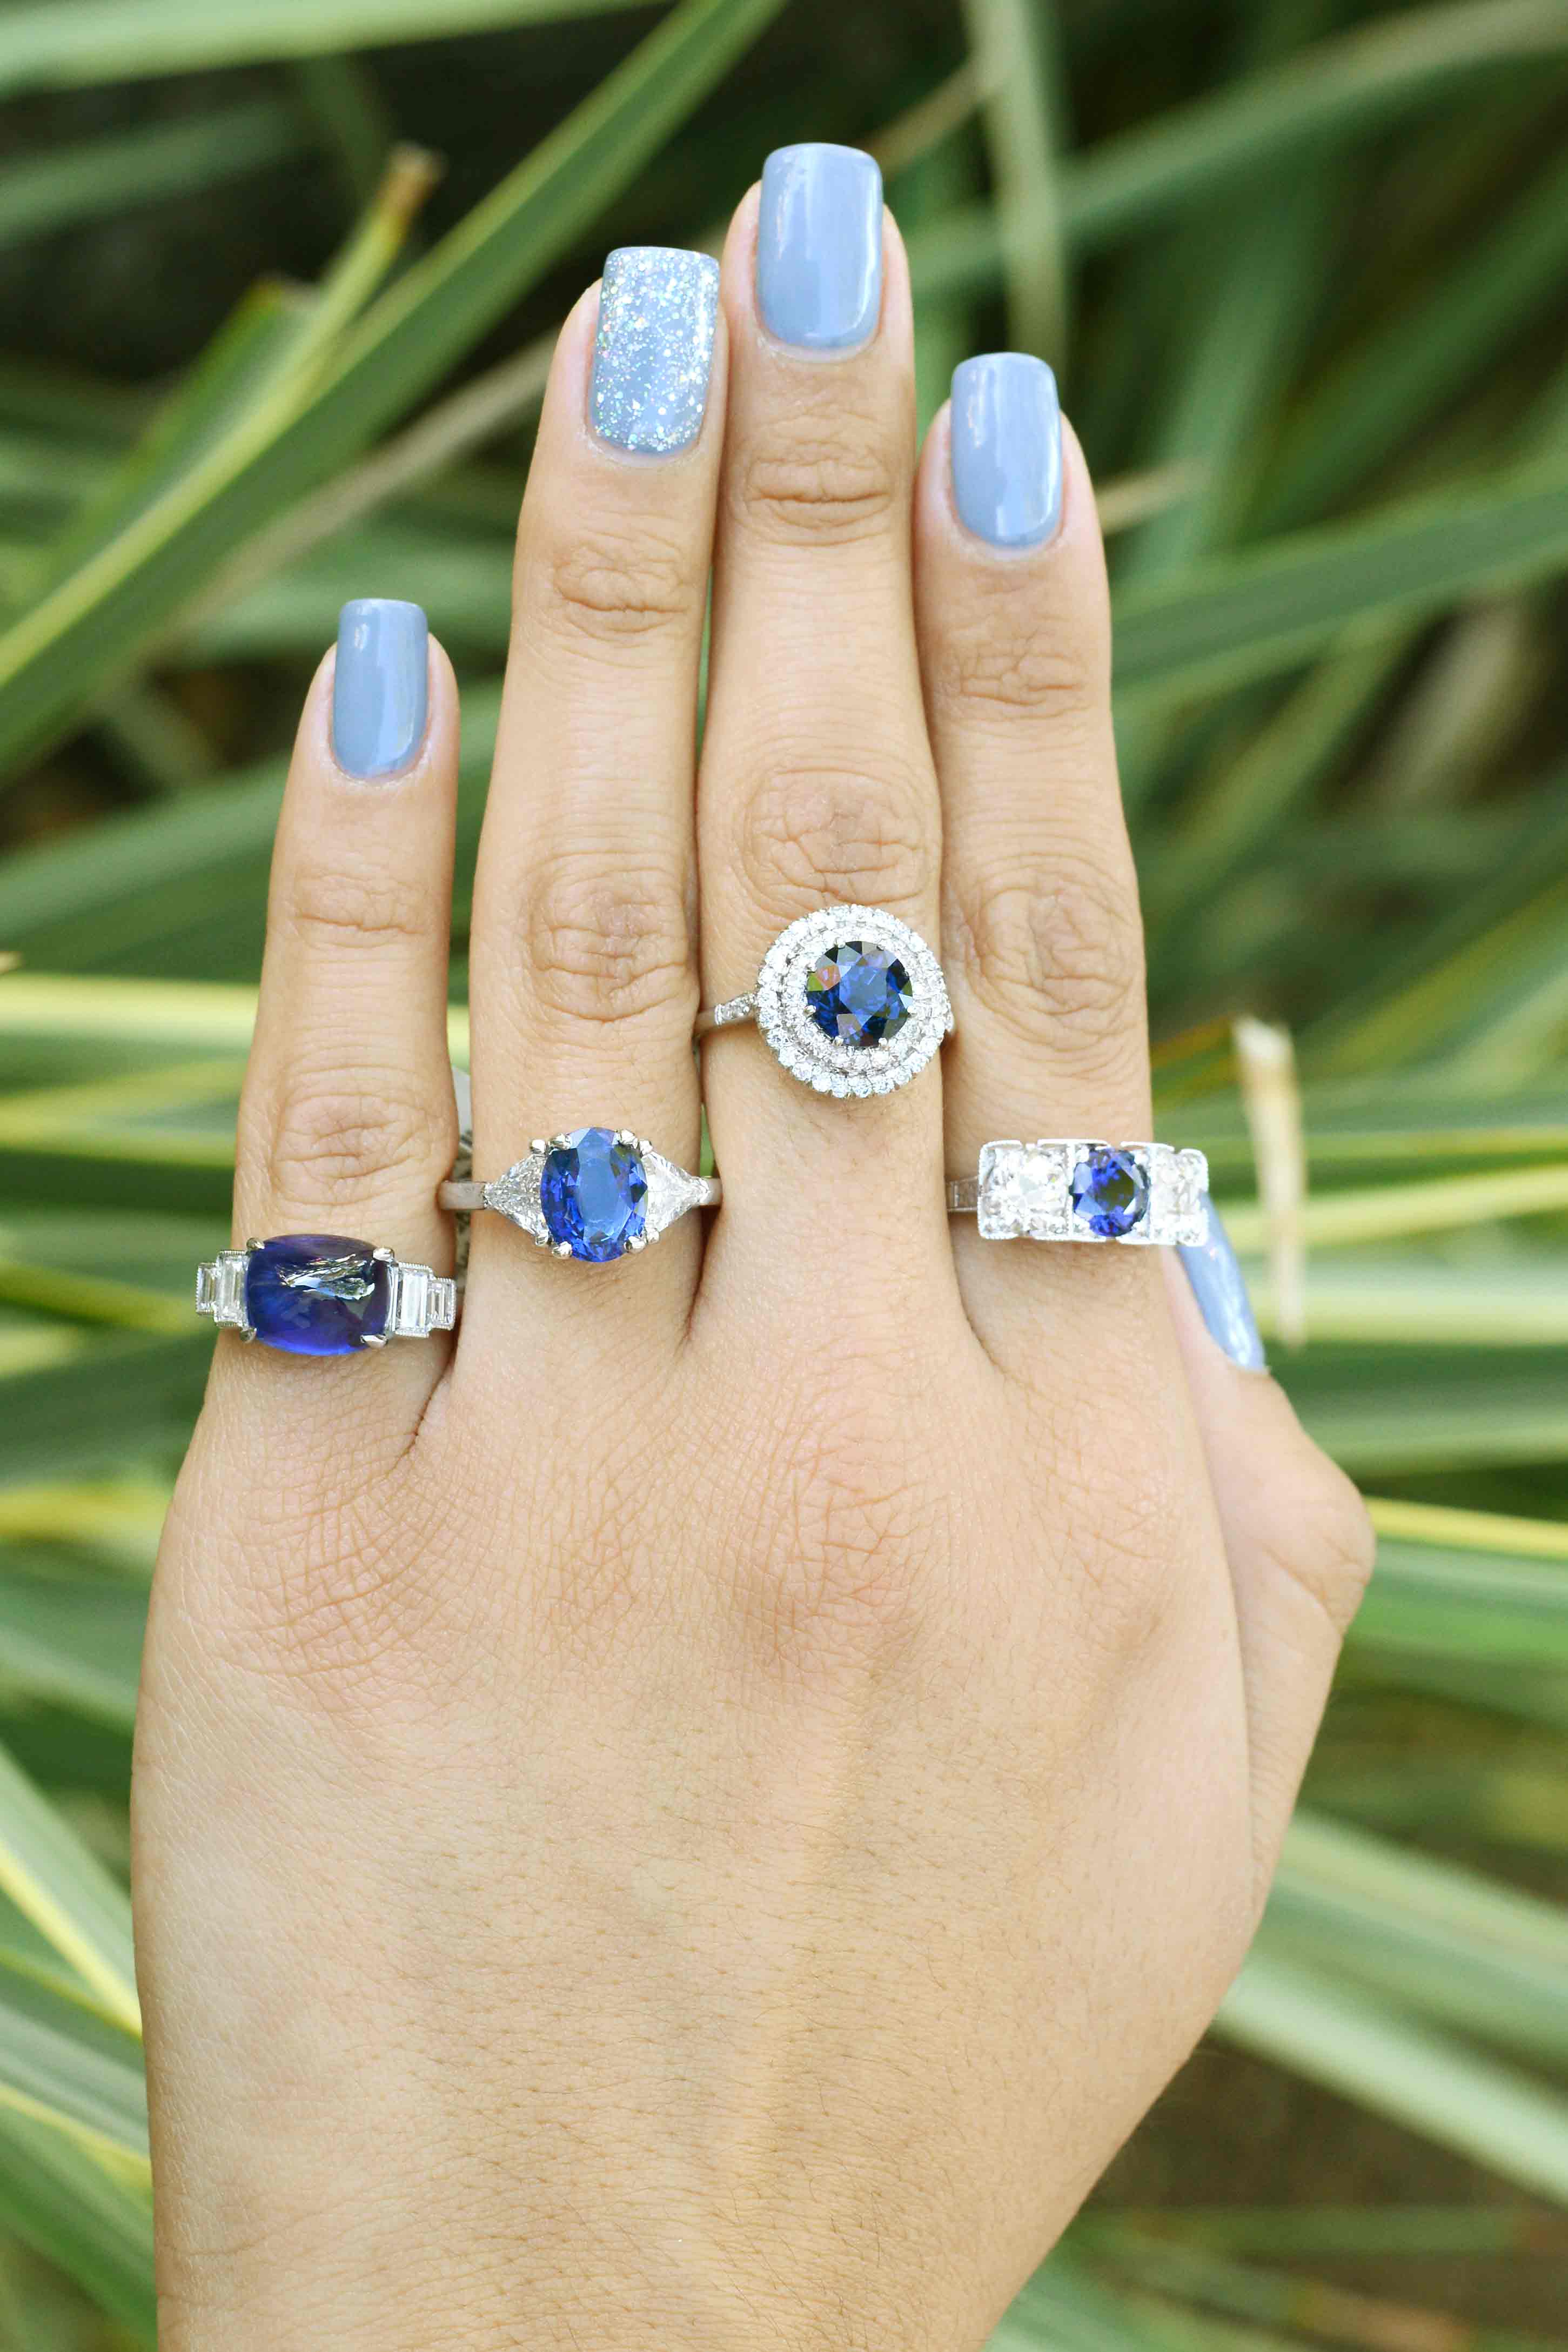 A peek at some of the diamond and blue sapphire engagement rings available from our shop.